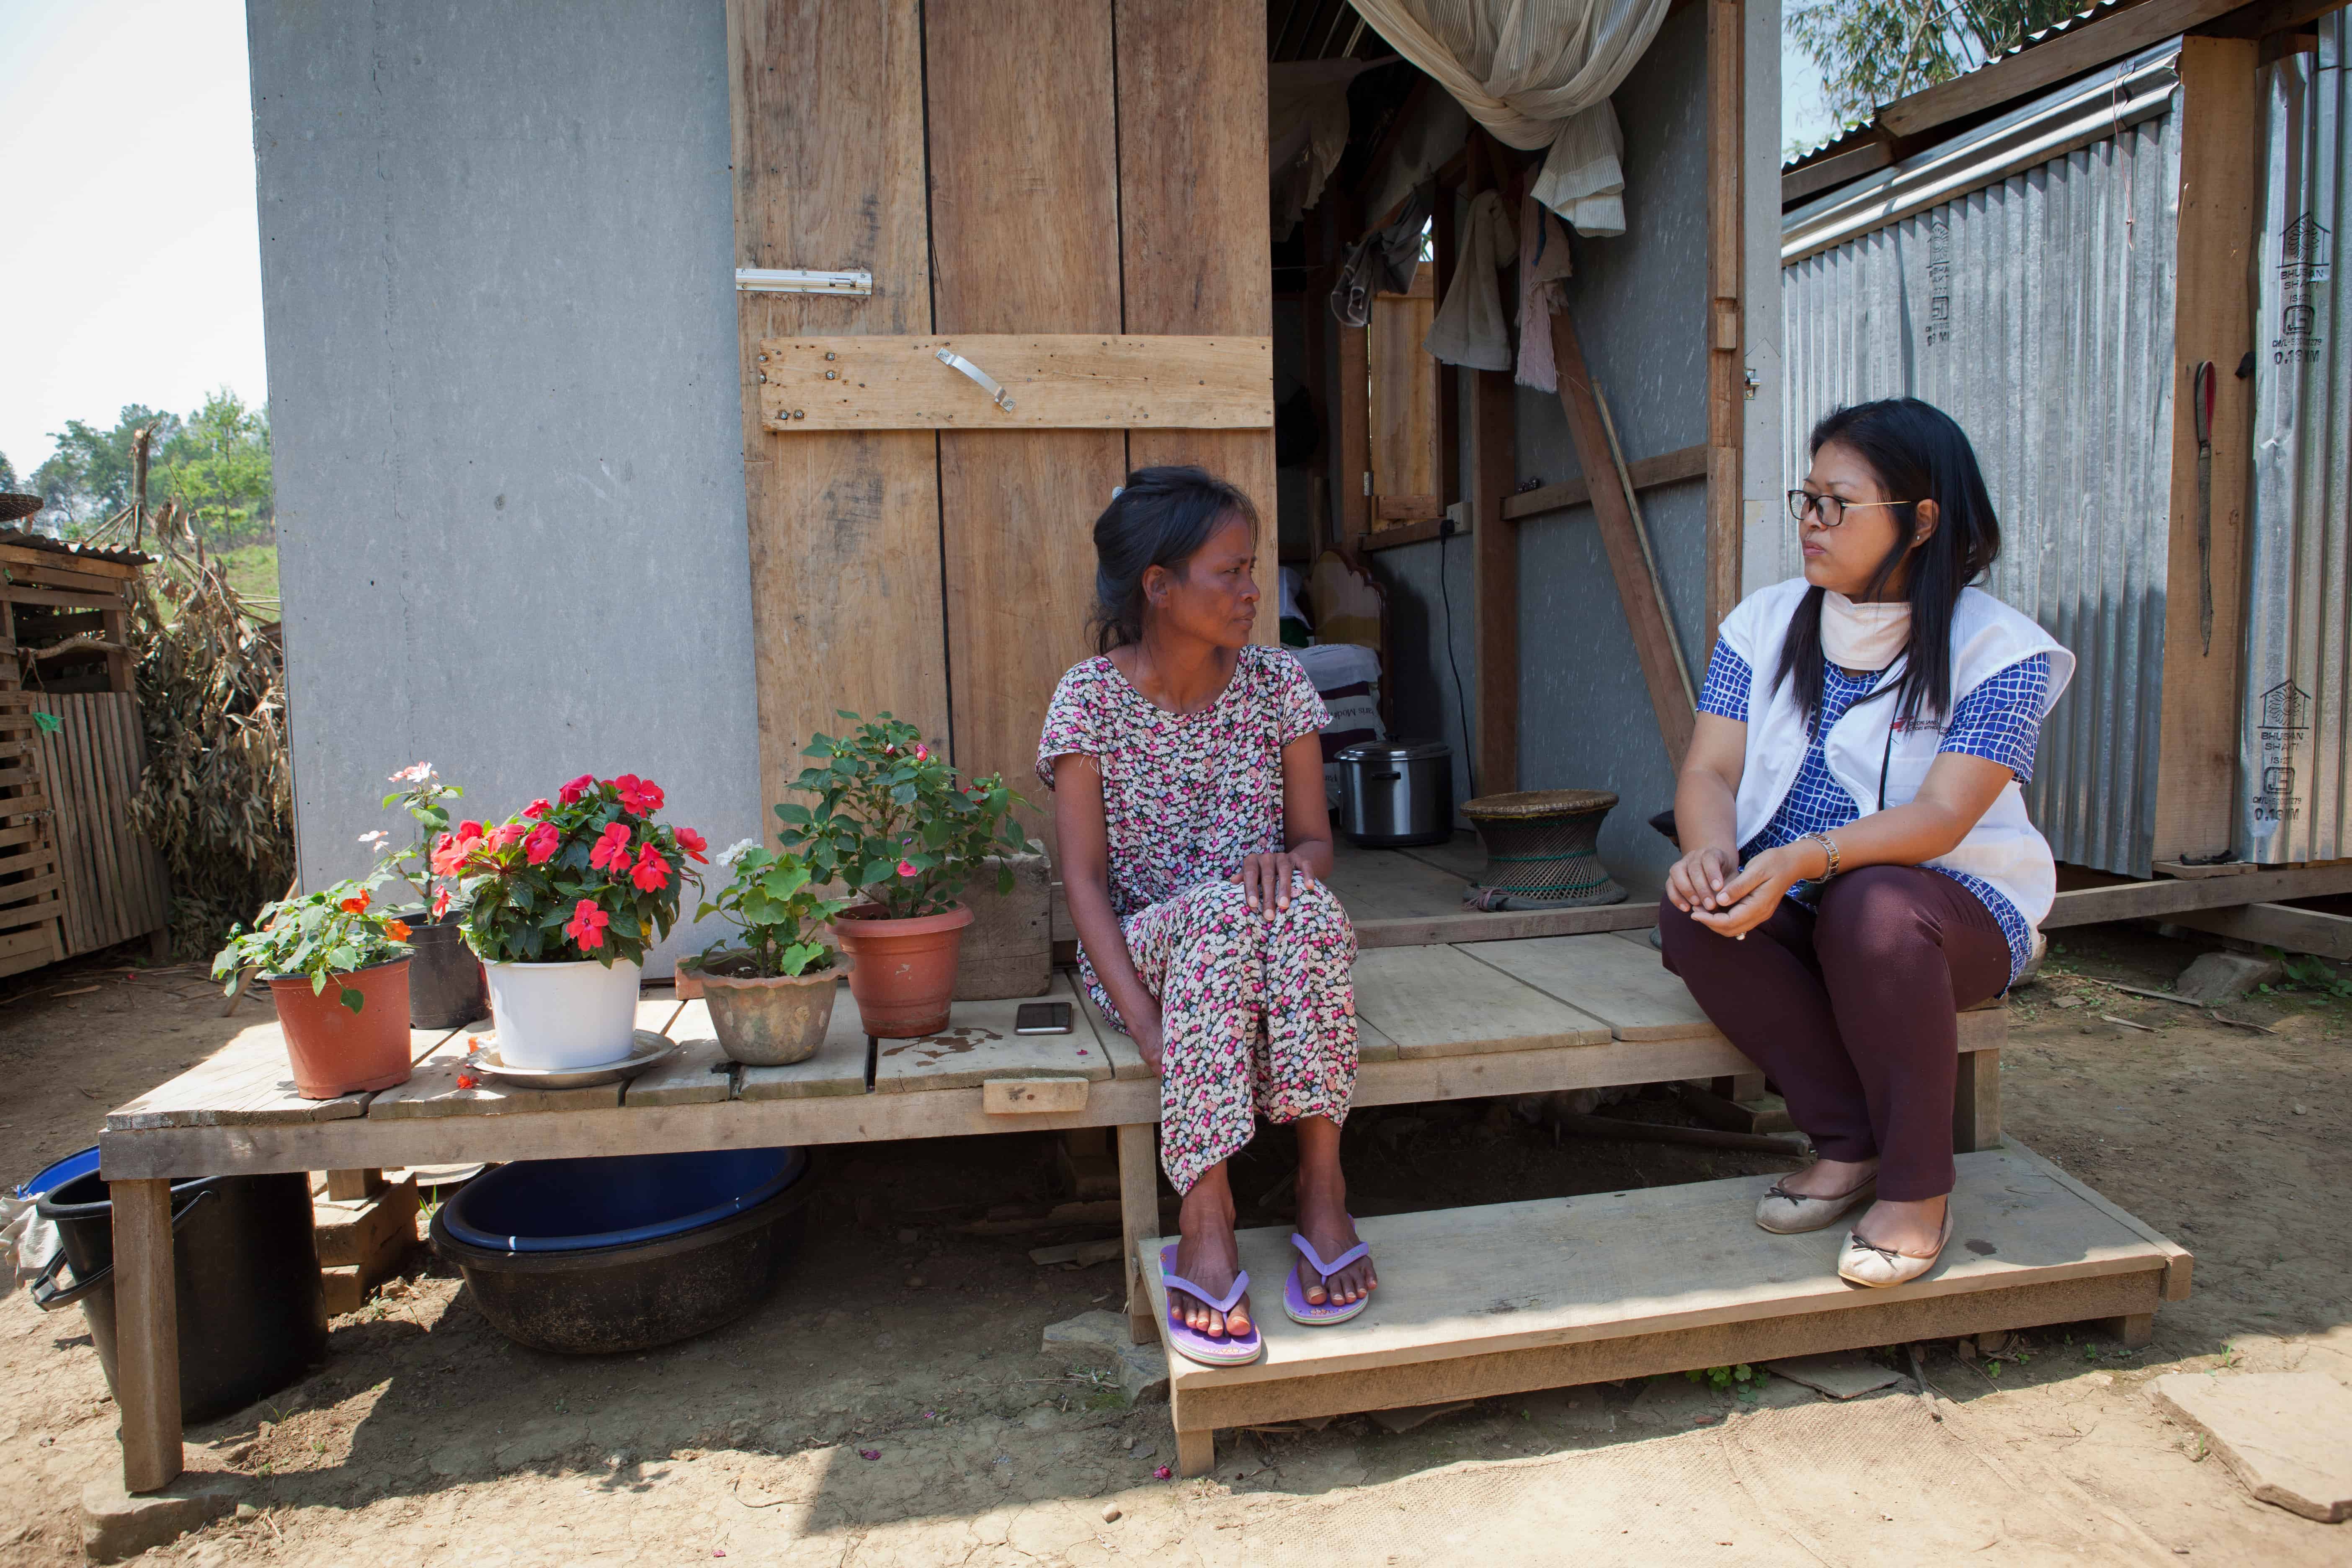 Neilam Synrem, who is receiving treatment for MDR-TB, talks to an MSF counsellor in front of the house MSF built for her next to her family home, in order to reduce the chances of transmission of the disease to the rest of her family. Manipur, India, April 2019.
© JAN-JOSEPH STOK